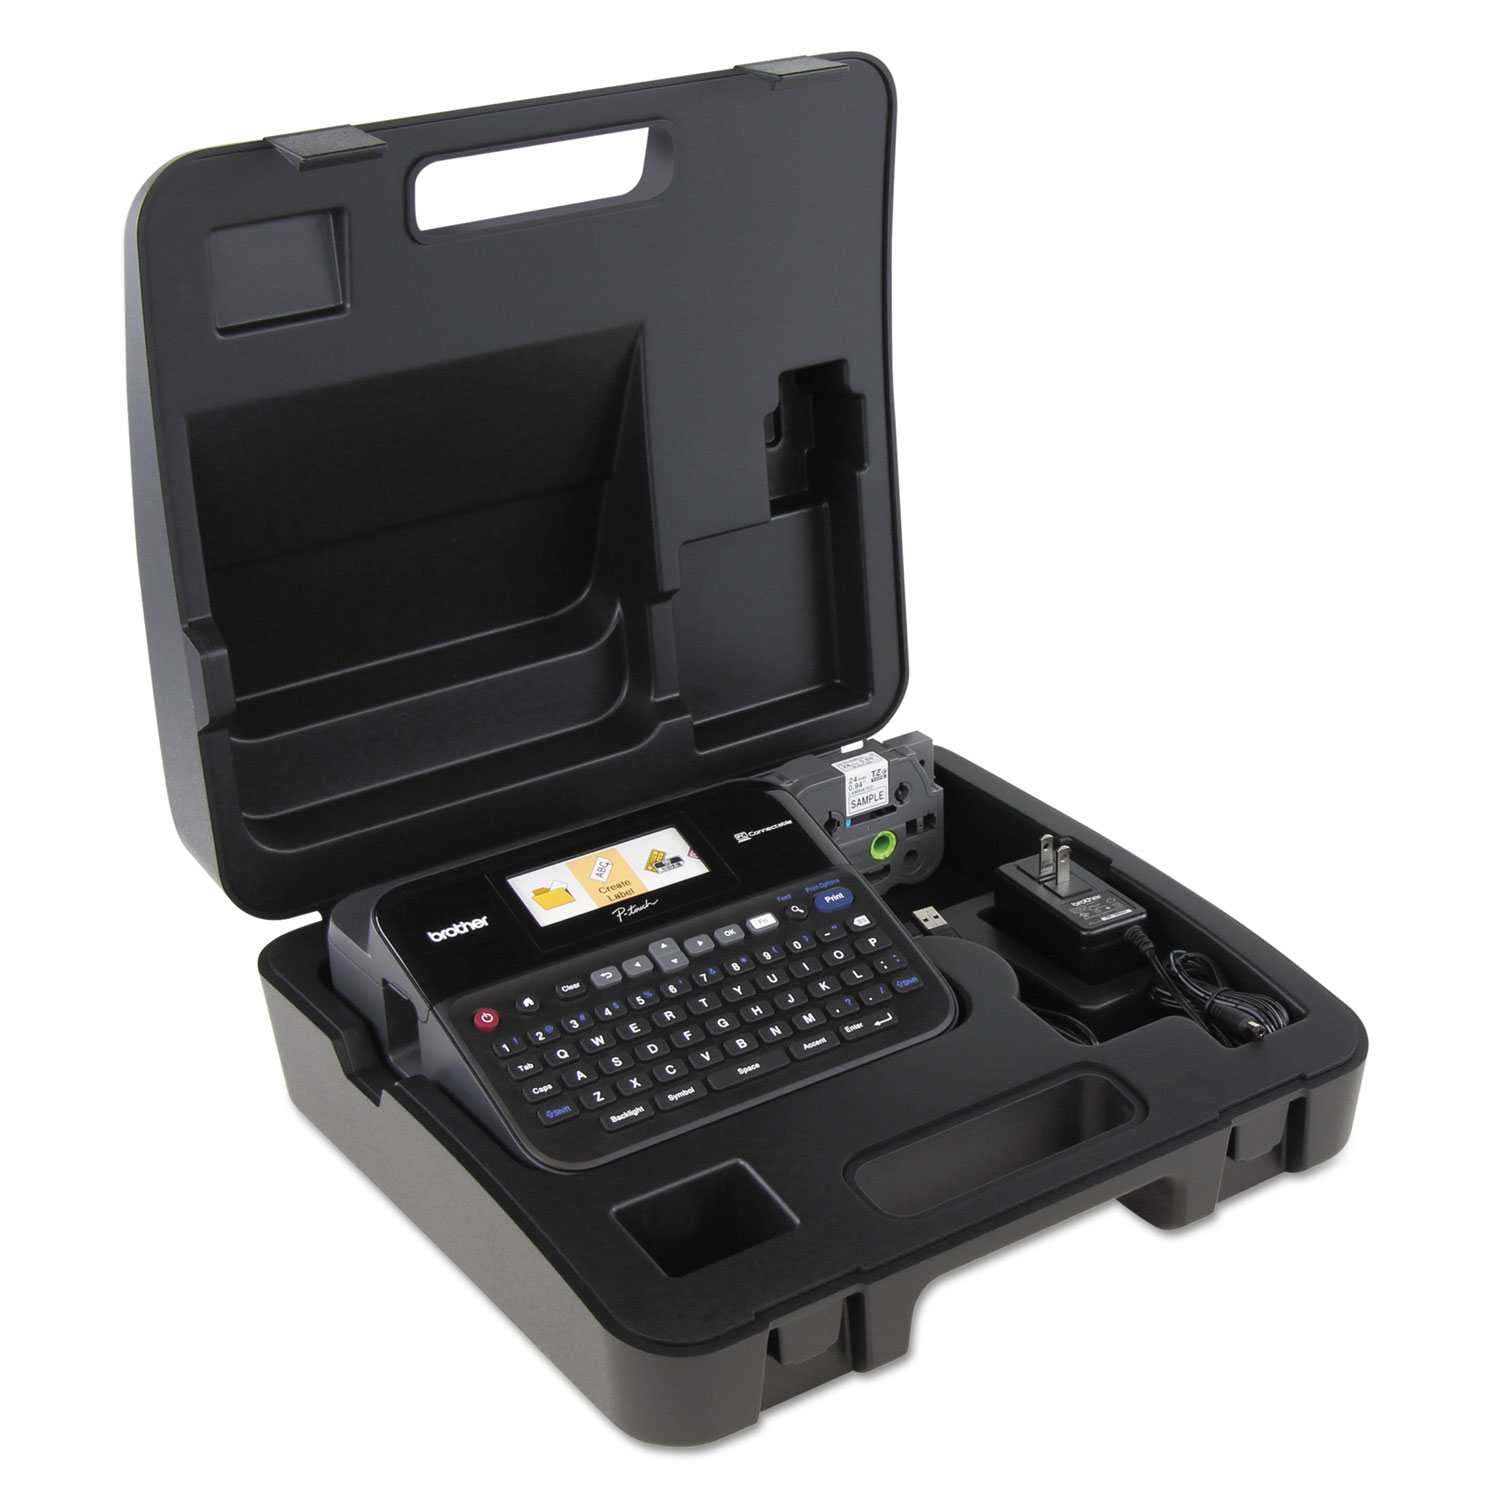 PT-D600VP PC-Connectable Label Maker with Color Display and Carry Case, Black